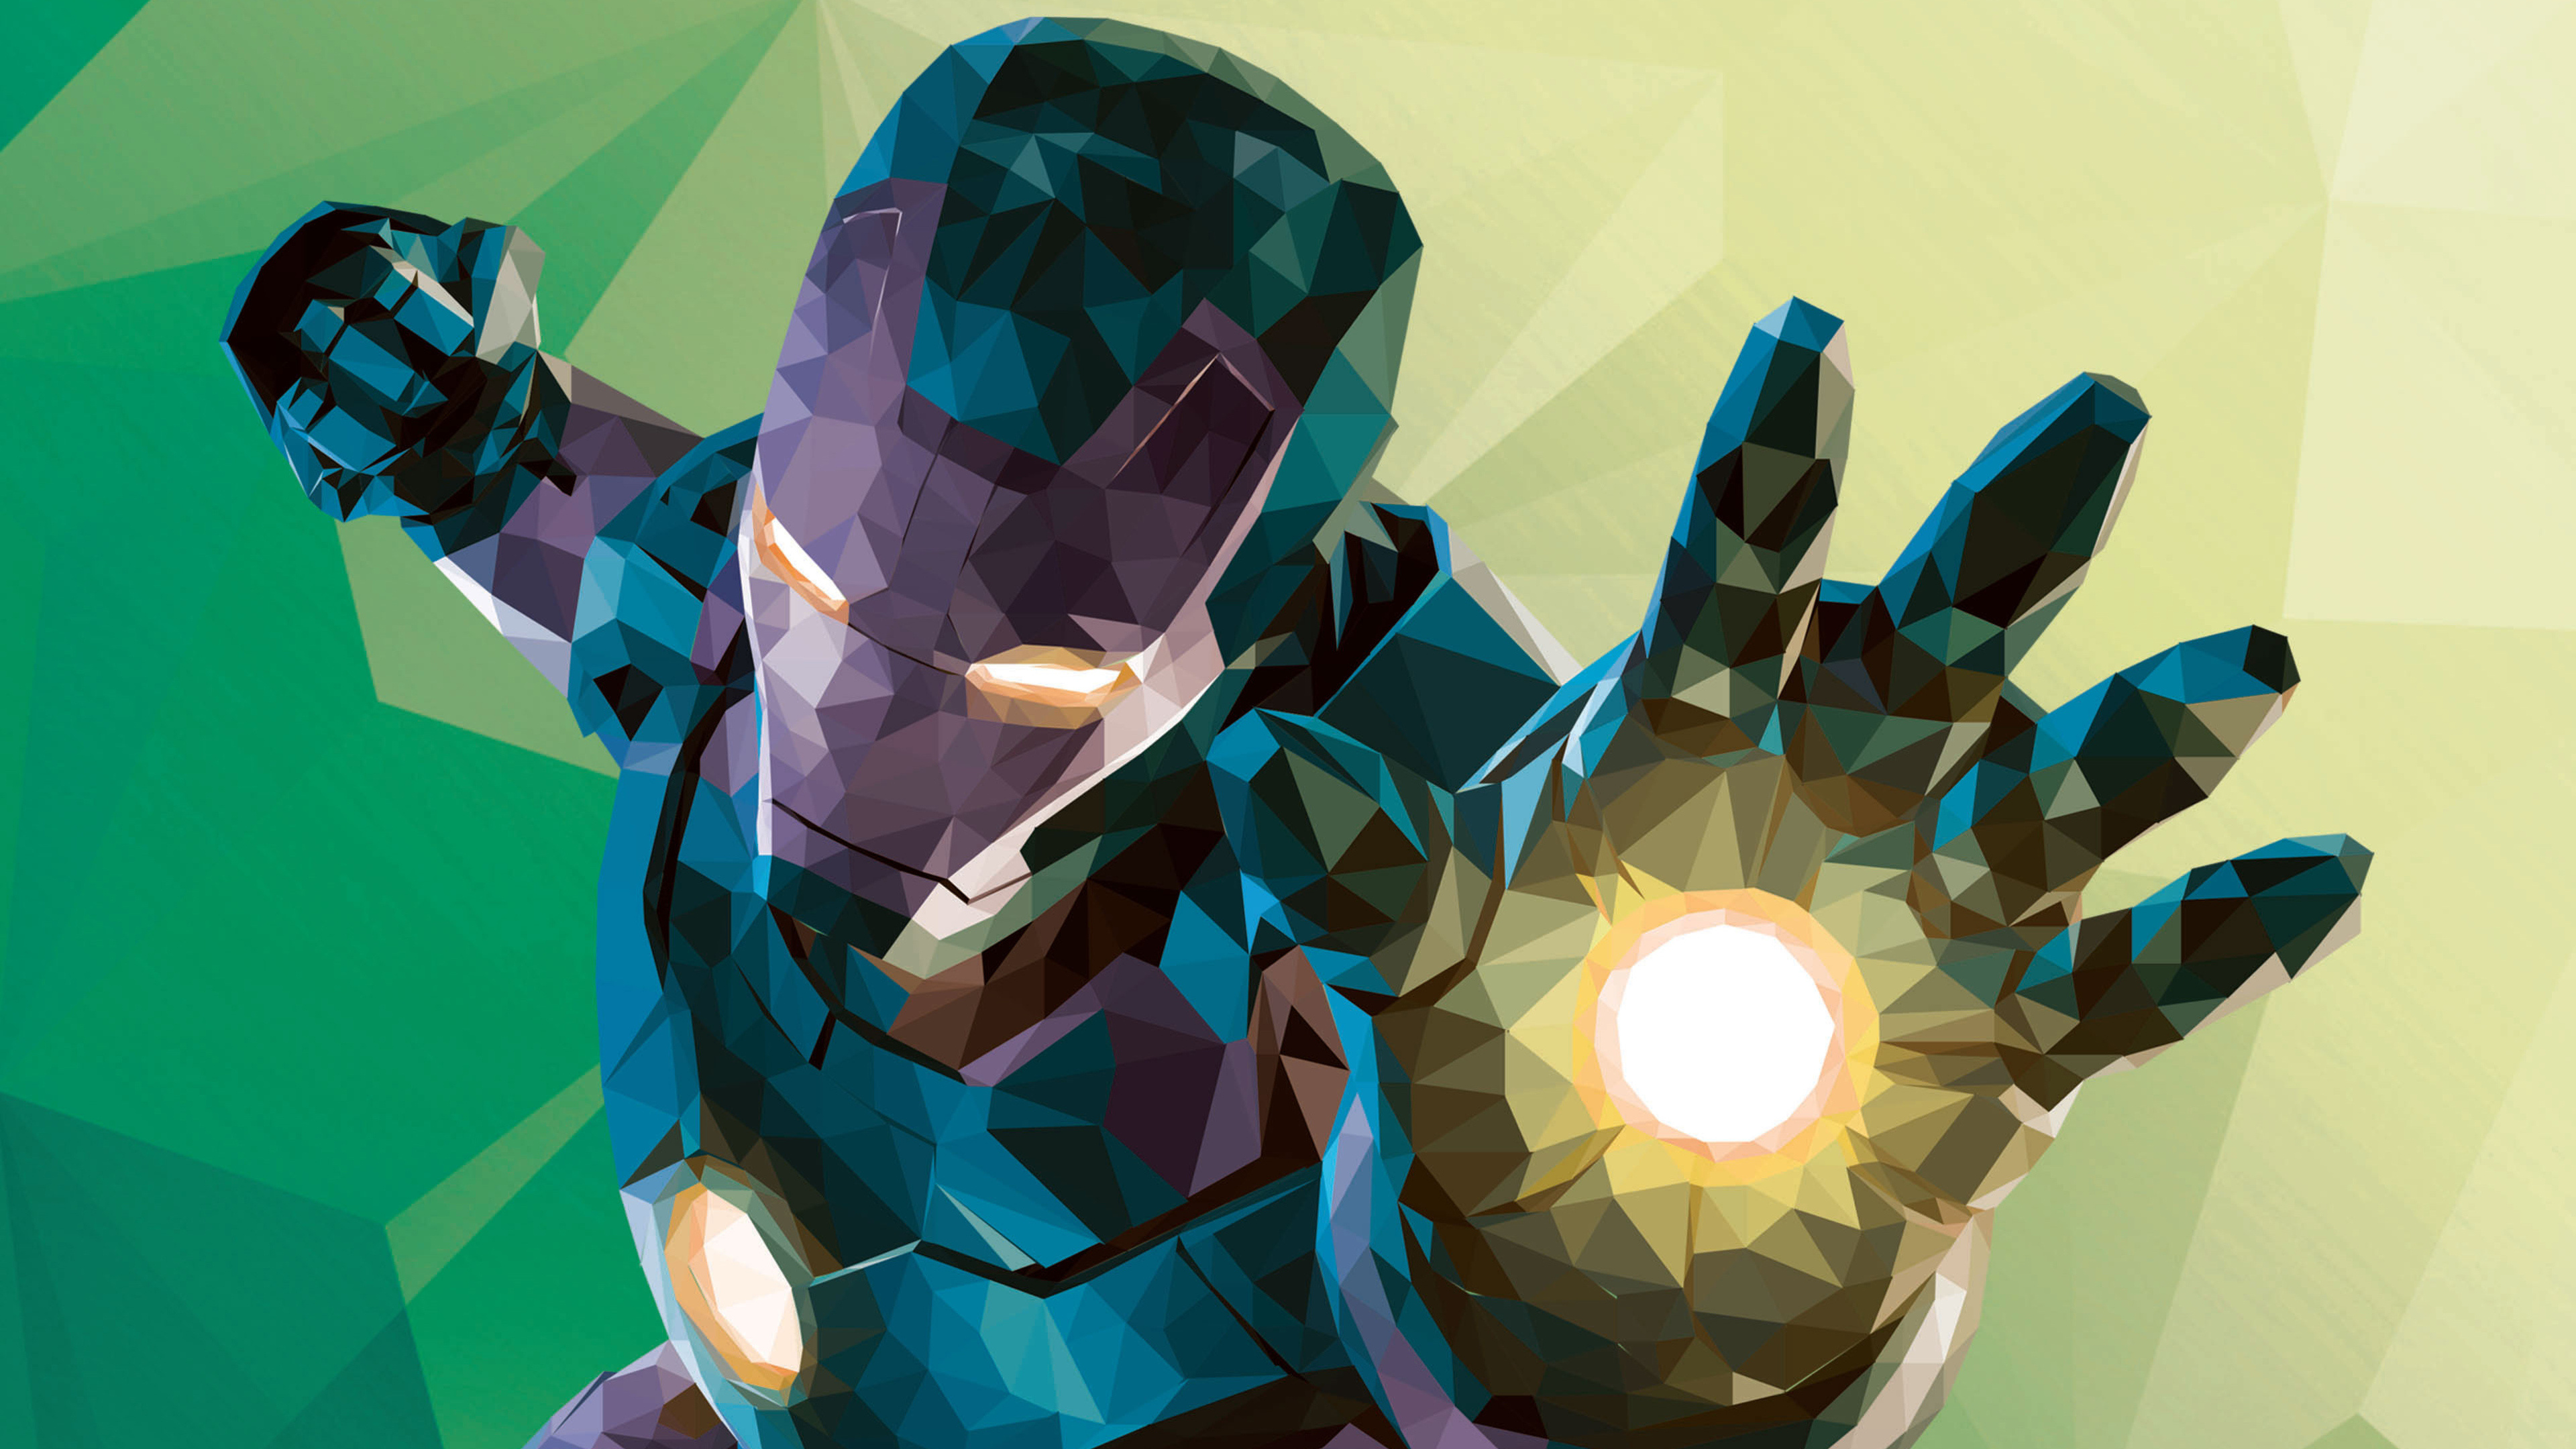 Graphic: Low poly Iron Man, Visual design, Geometric art, Triangles, Angles. 3840x2160 4K Background.